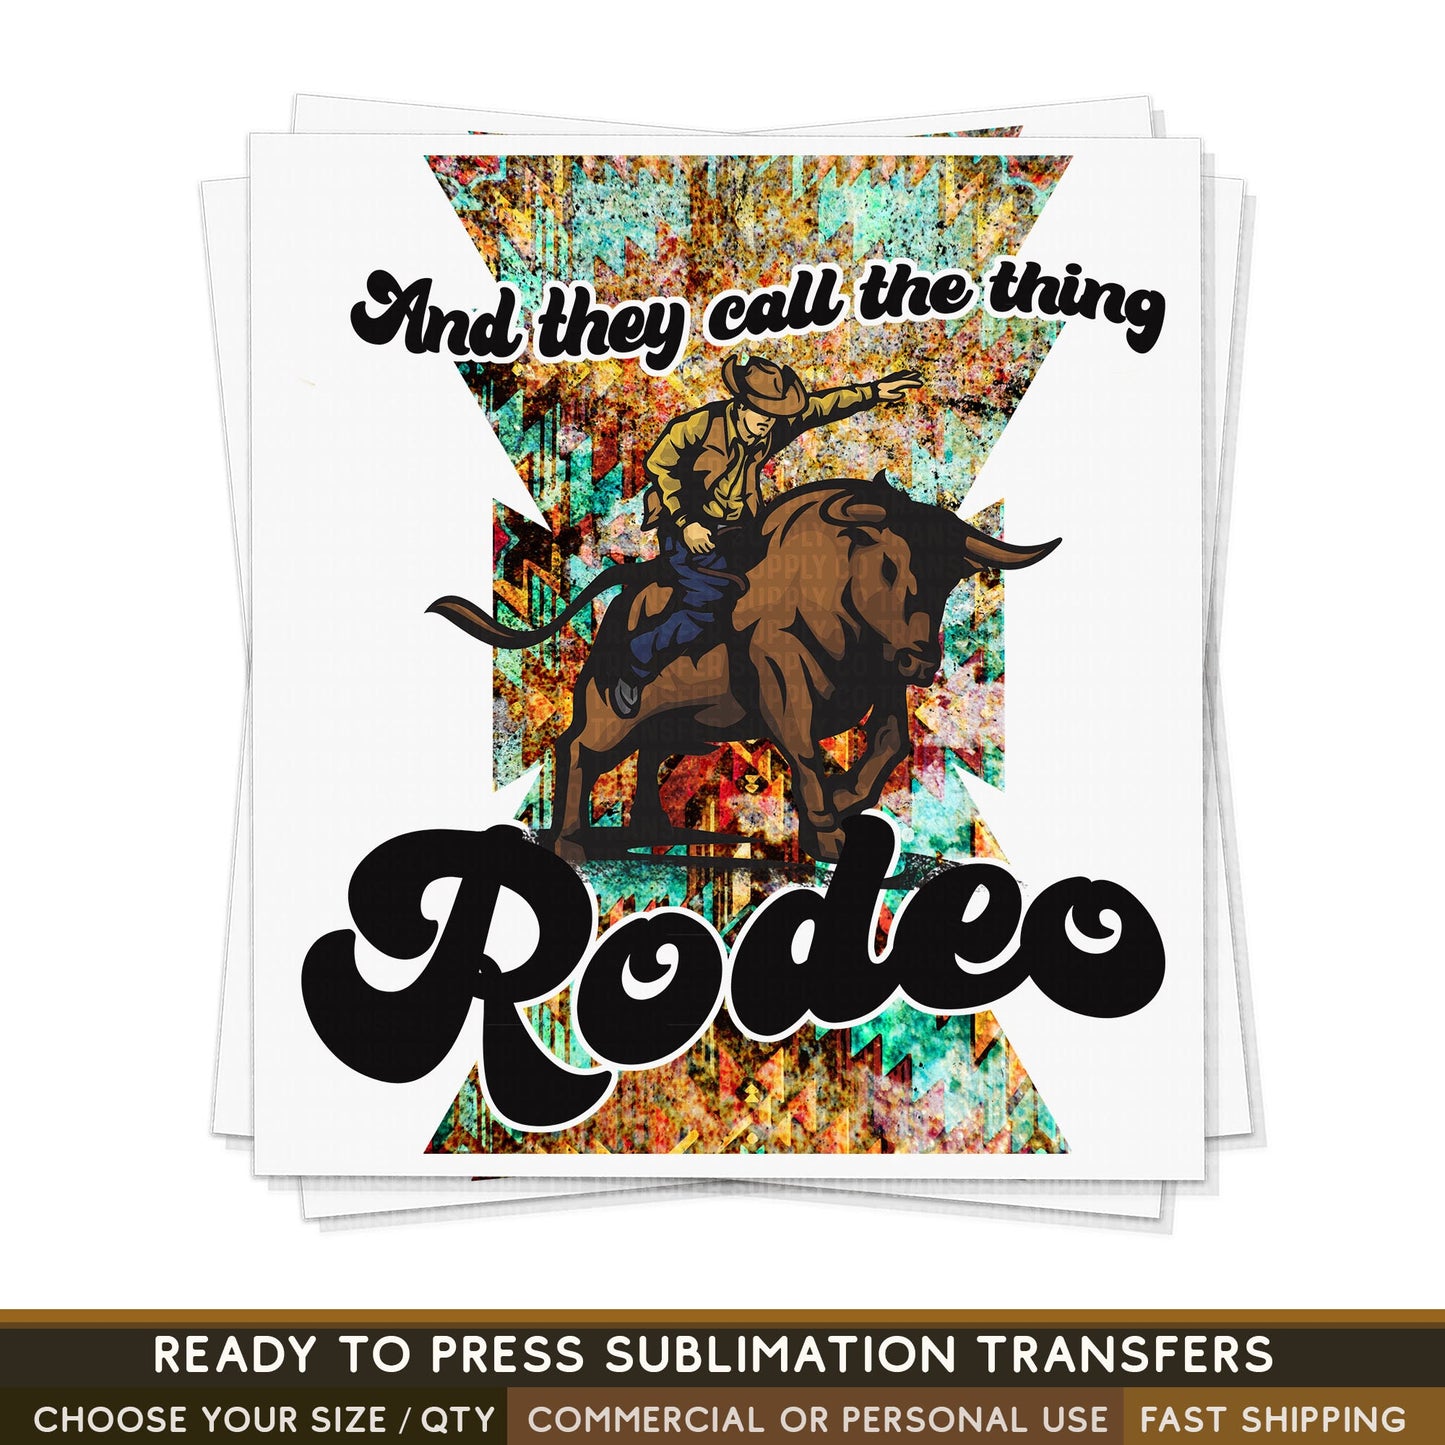 They Call The Thing Rodeo, Ready To Press Sublimation Transfers, Ready To Press Transfers,Sublimation Prints, Sublimation Transfers